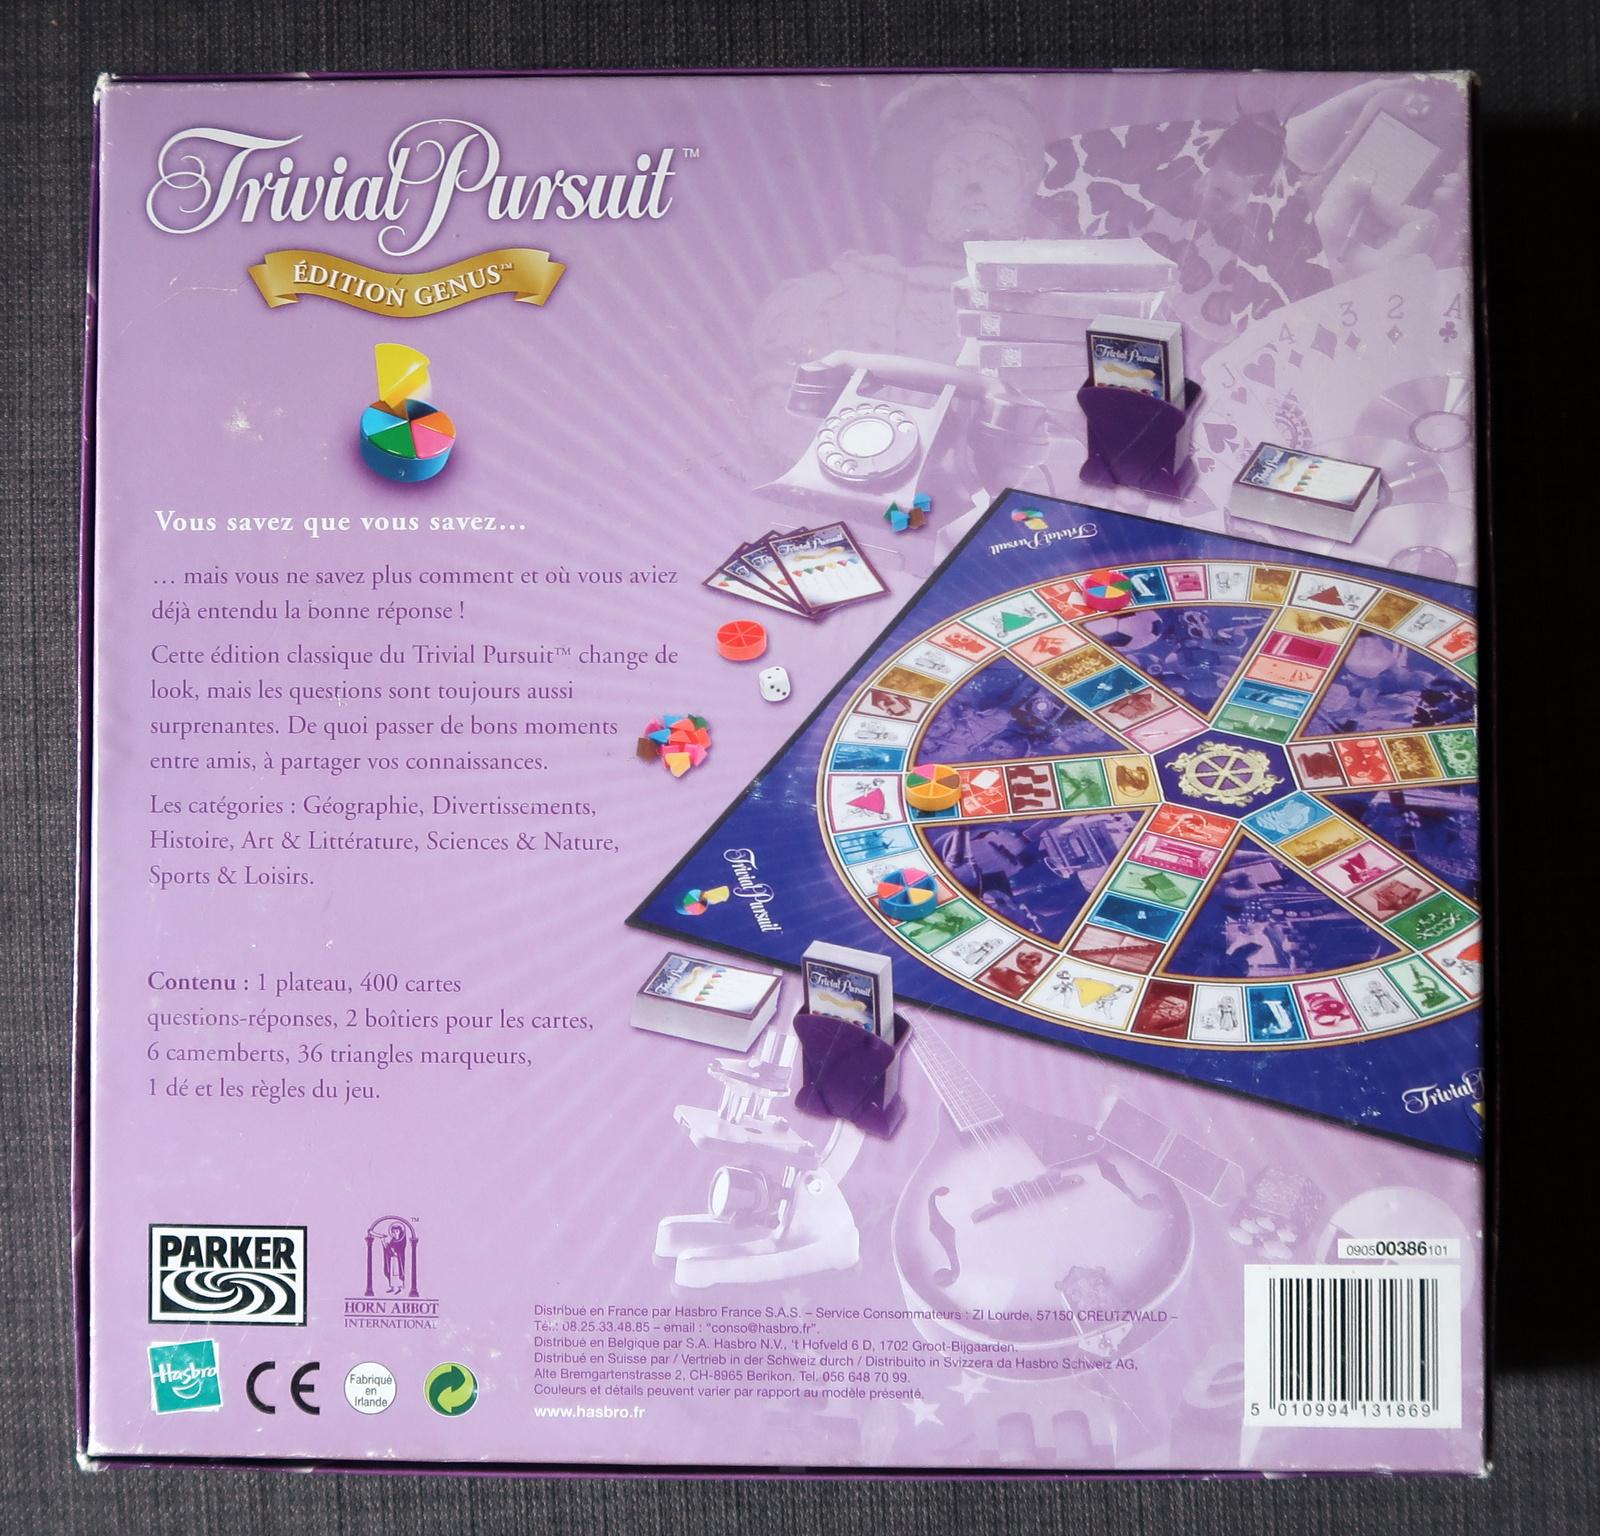 Immerse yourself in a world of intellect and entertainment with the Trivial Pursuit Edition Genus, Edition du 21 siècle. This classic table game, featuring 2400 questions and responses, is a testament to the pursuit of knowledge and enjoyment.

In